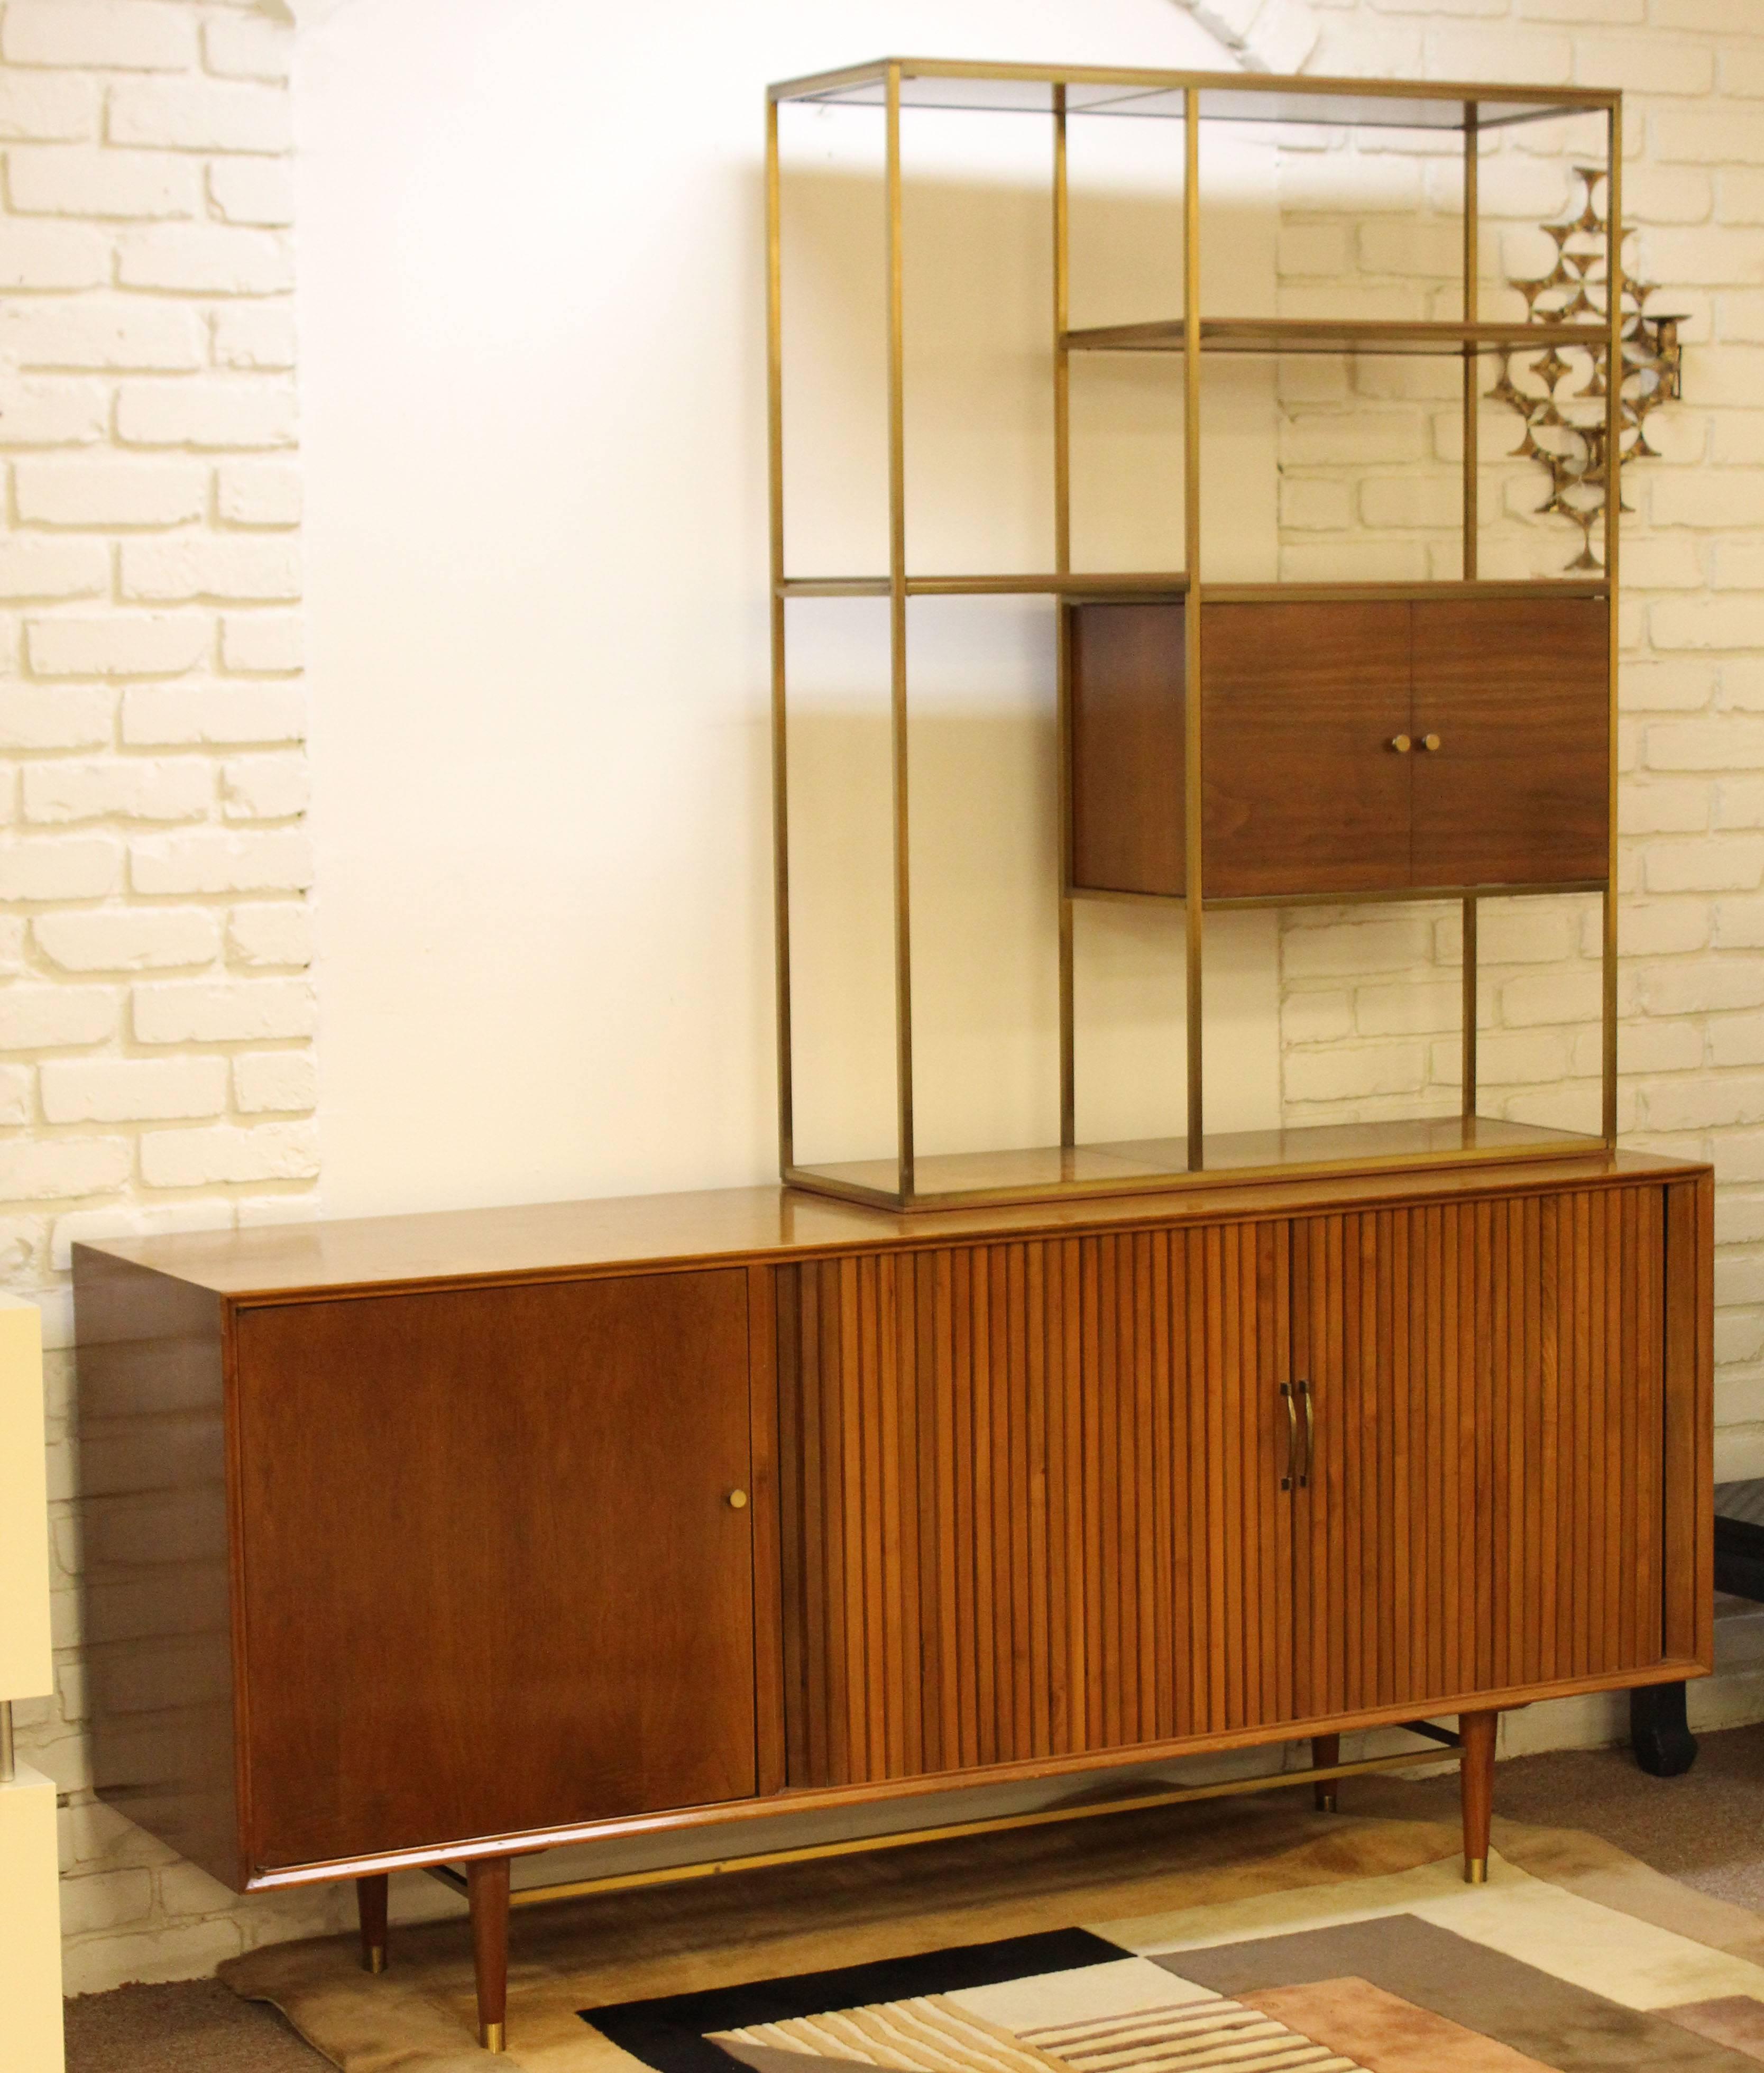 For your consideration is a magnificent, brass and walnut, credenza and shelving unit, by Furnette, in the style of Paul McCobb. In excellent condition. The dimensions of the credenza are 72